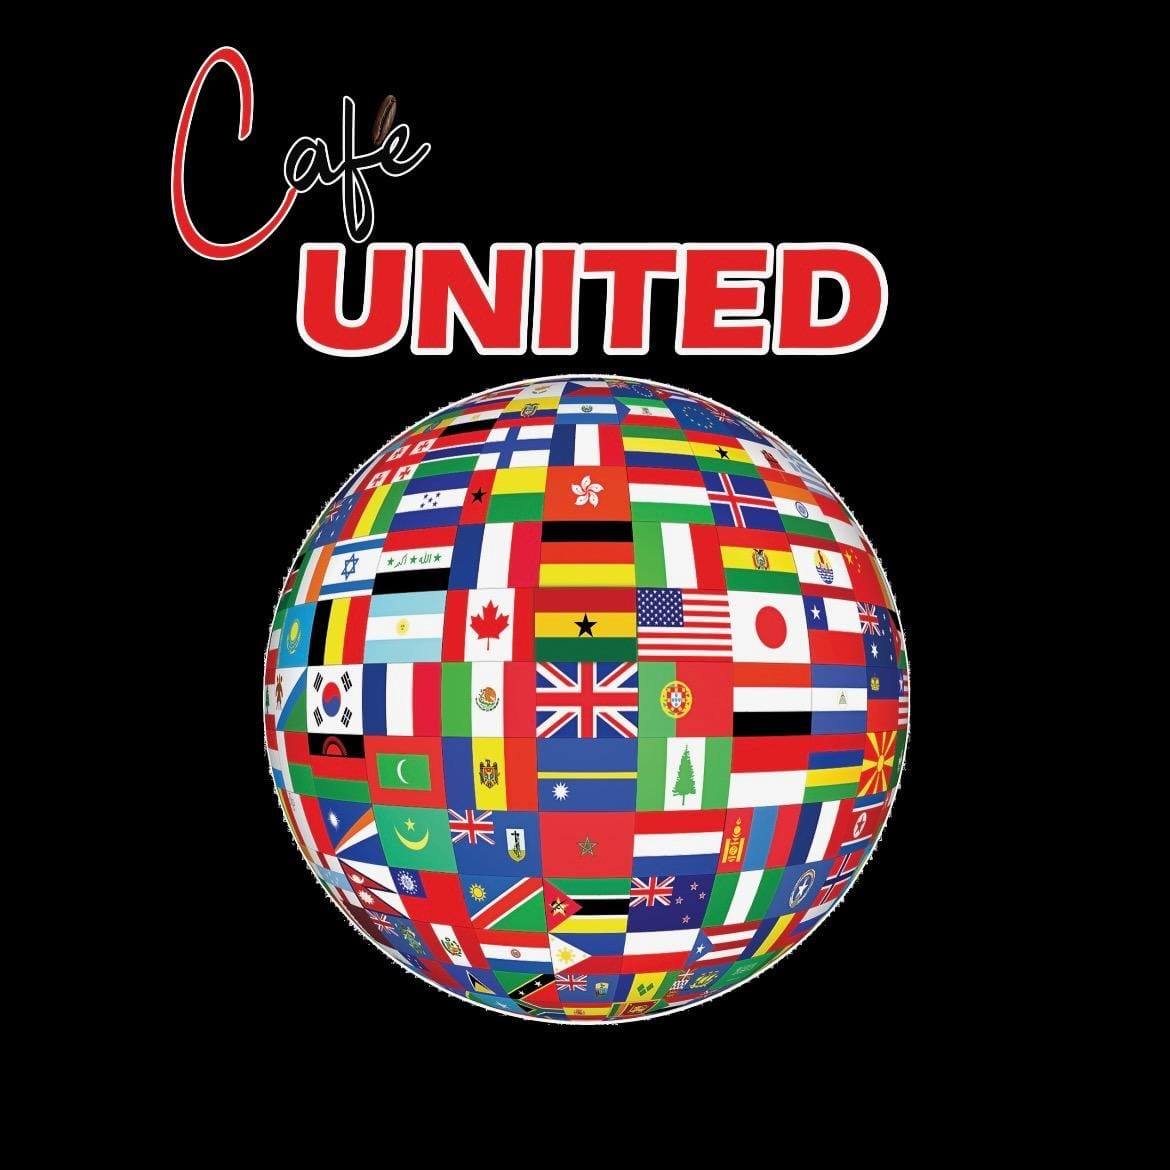 Local Business Spotlight: Cafe United [Video]